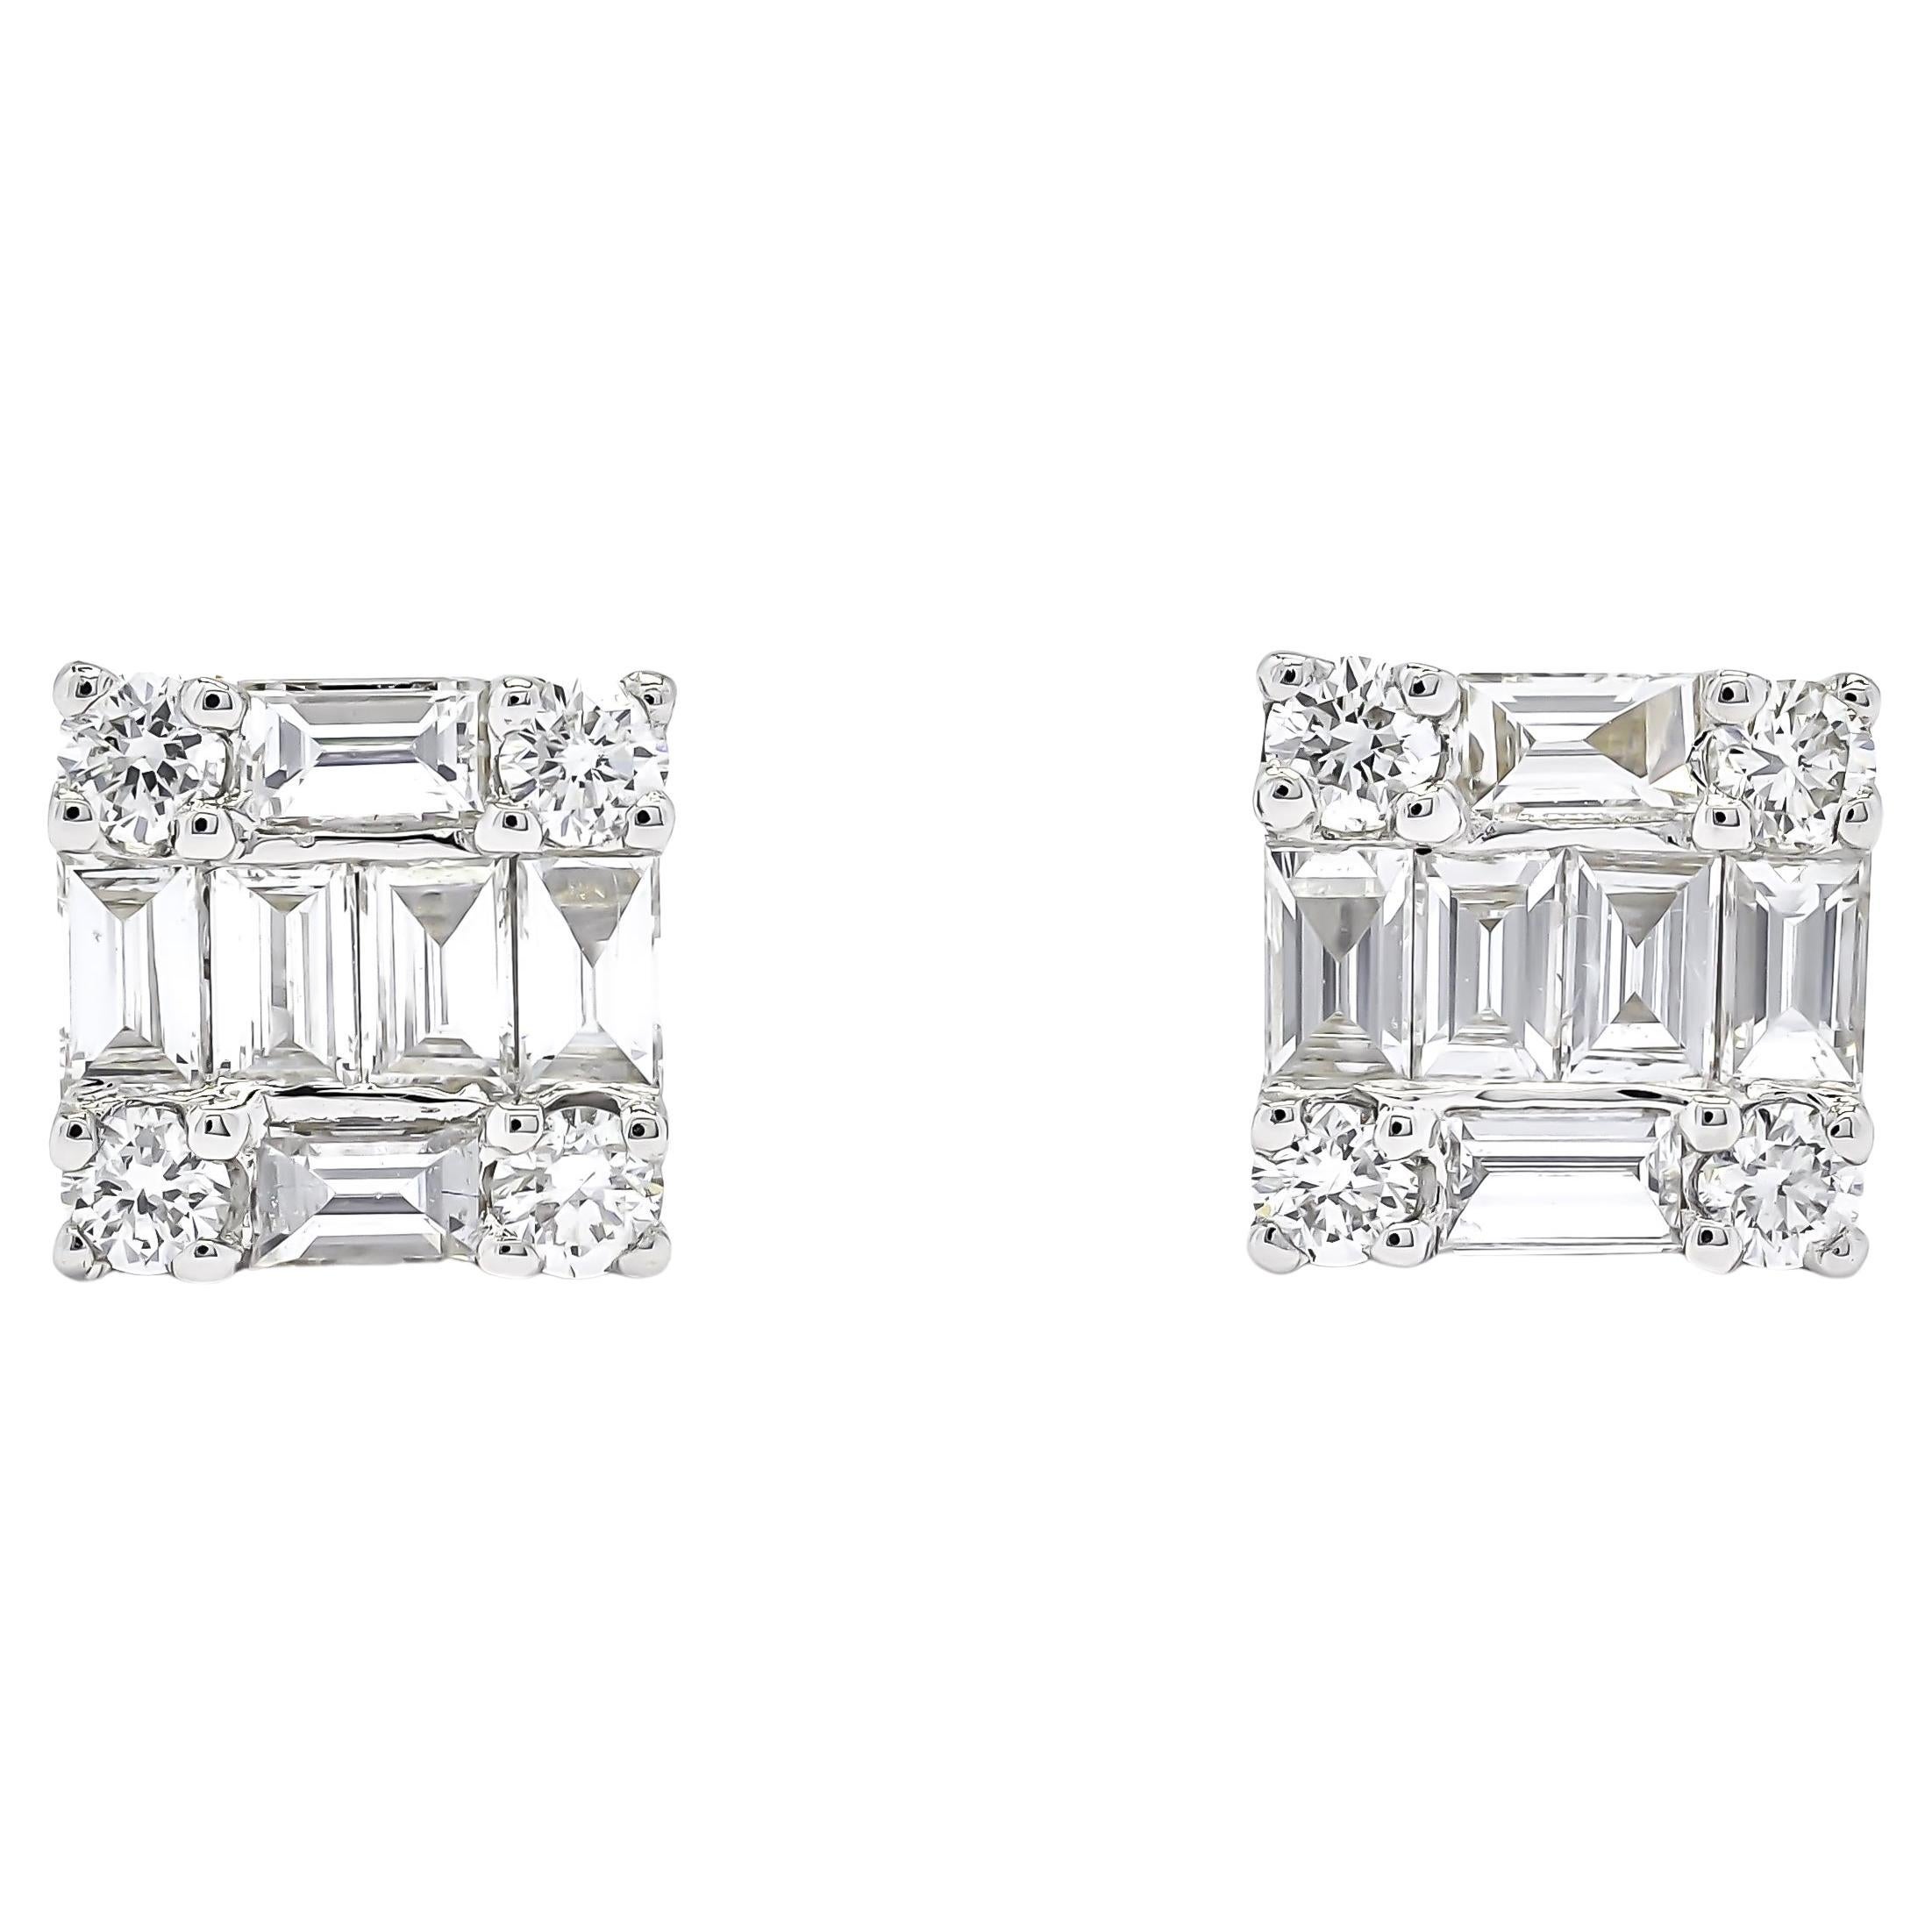 Natural Diamond 0.85 carats 18KT White Gold Cluster Stud Earrings 